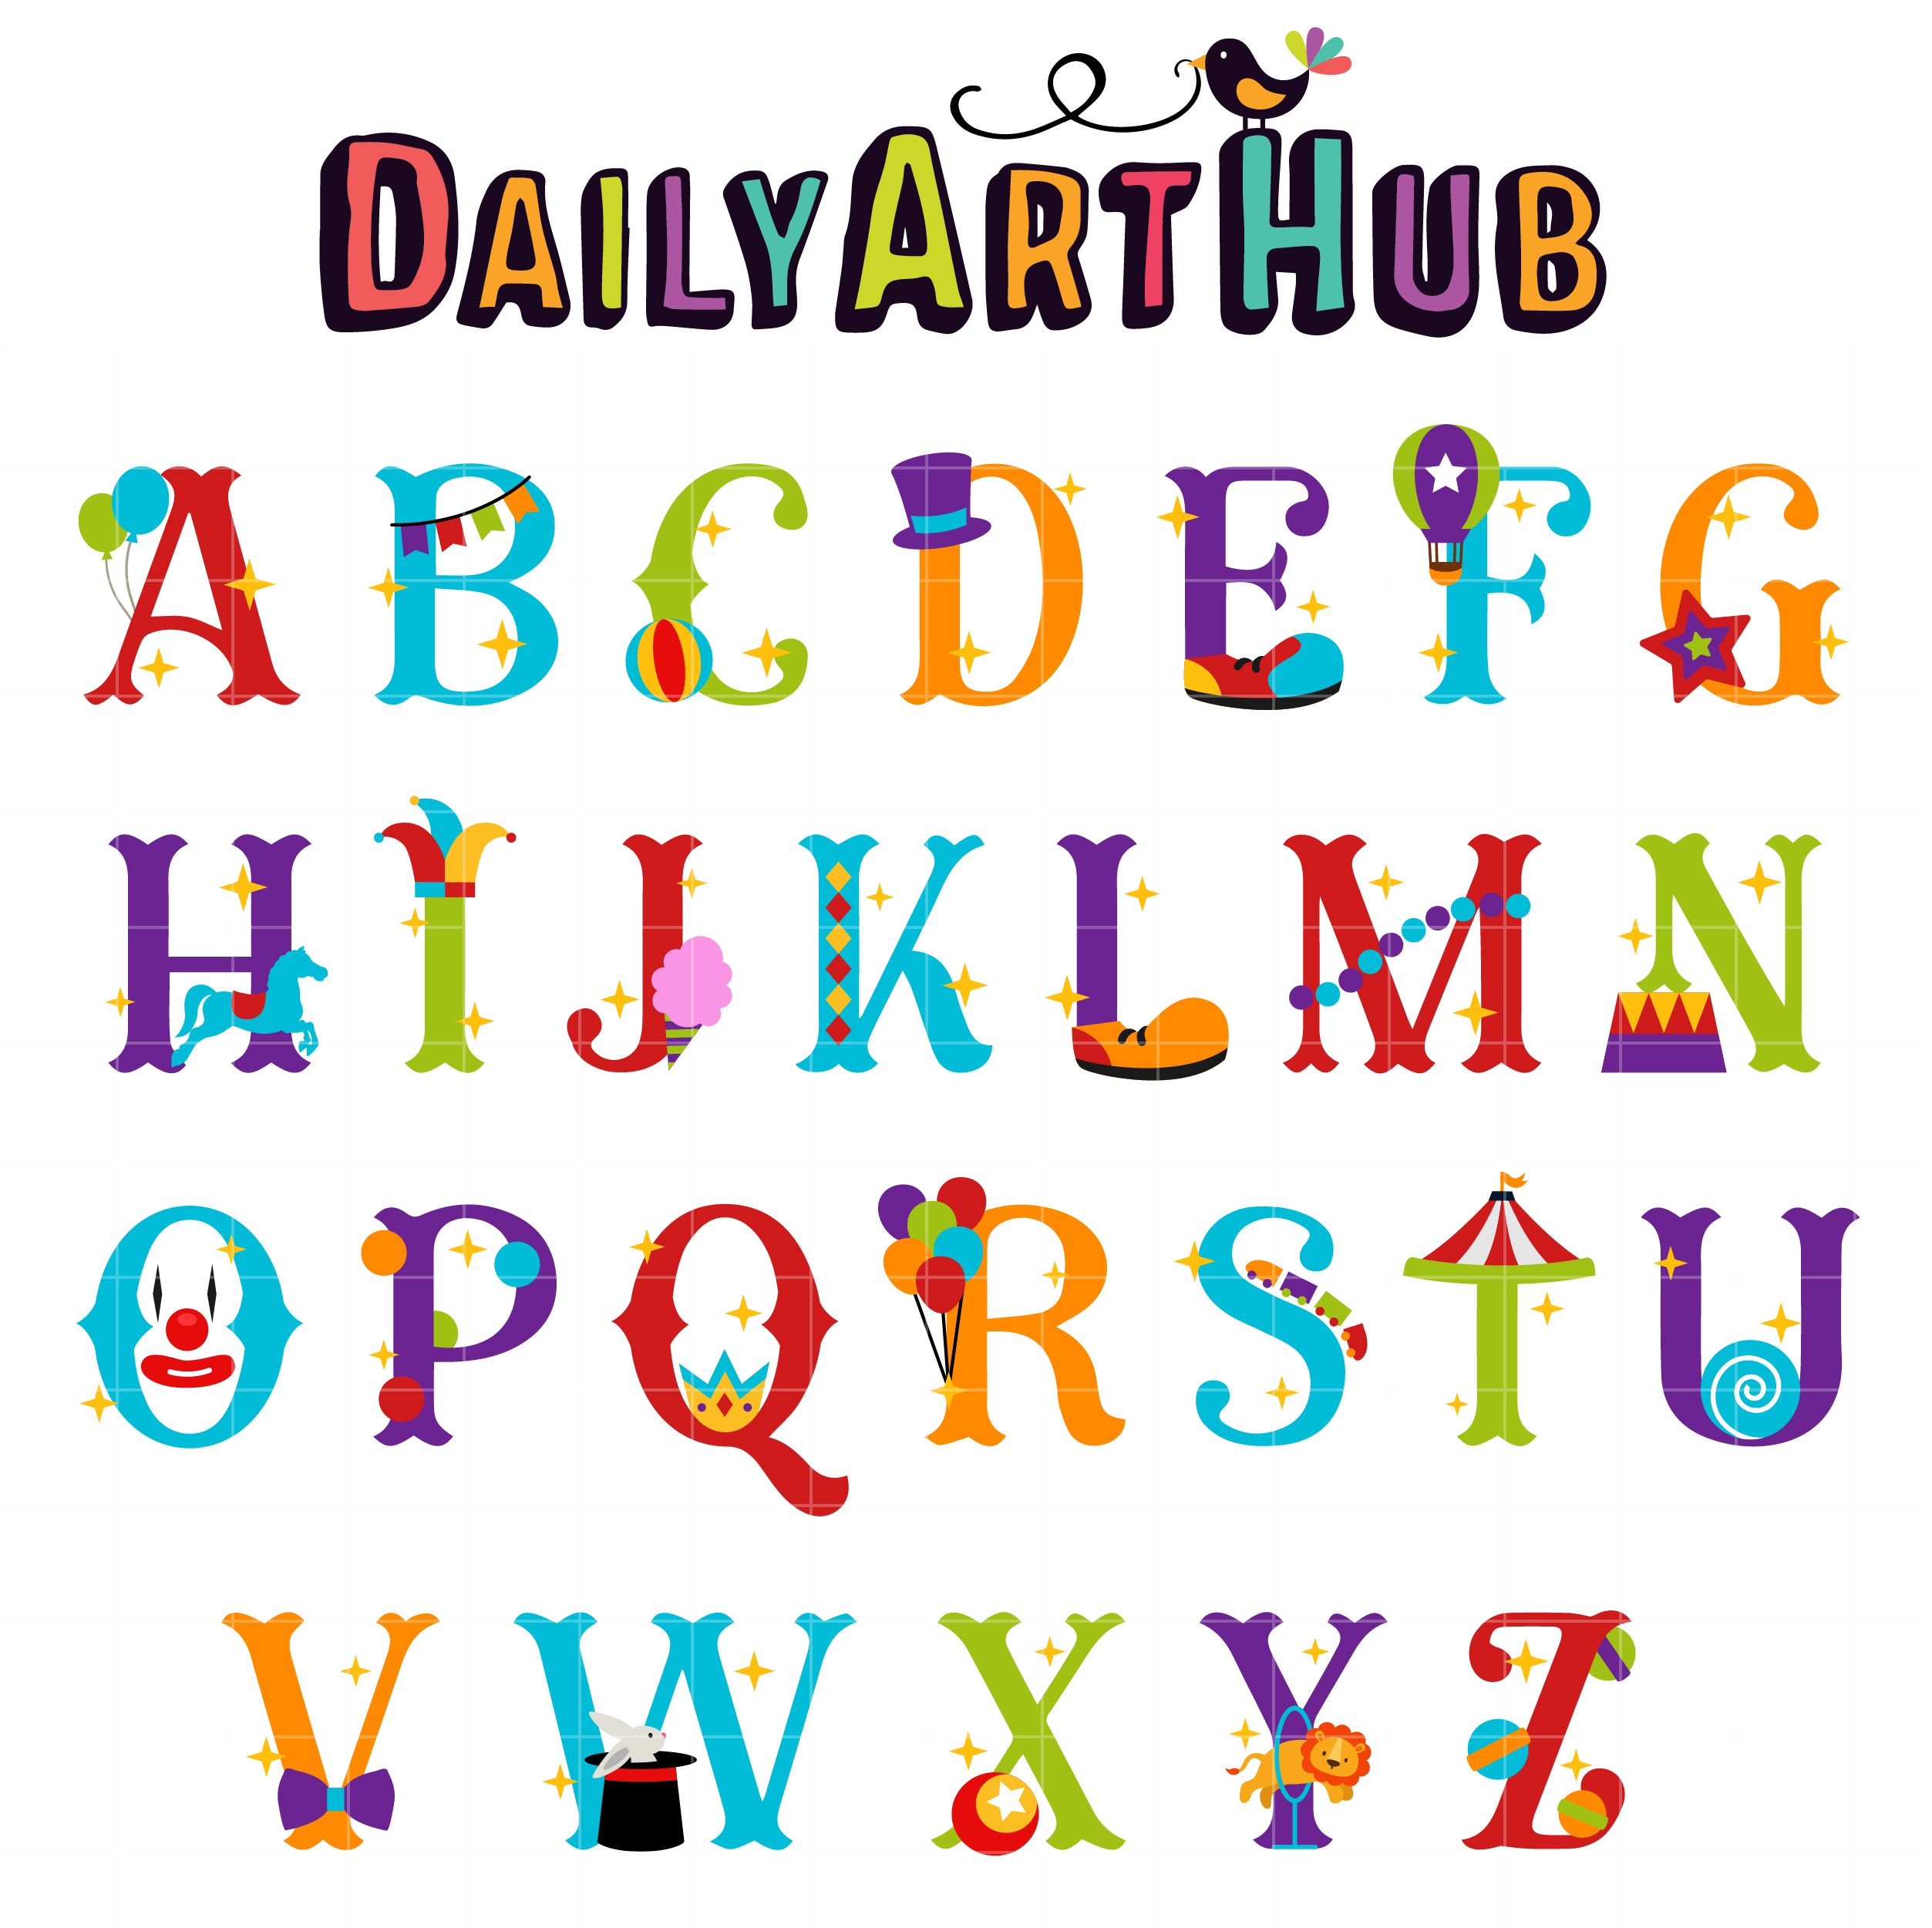 Circus Carnival Letters Clip Art Set Daily Art Hub Free Clip Art Everyday